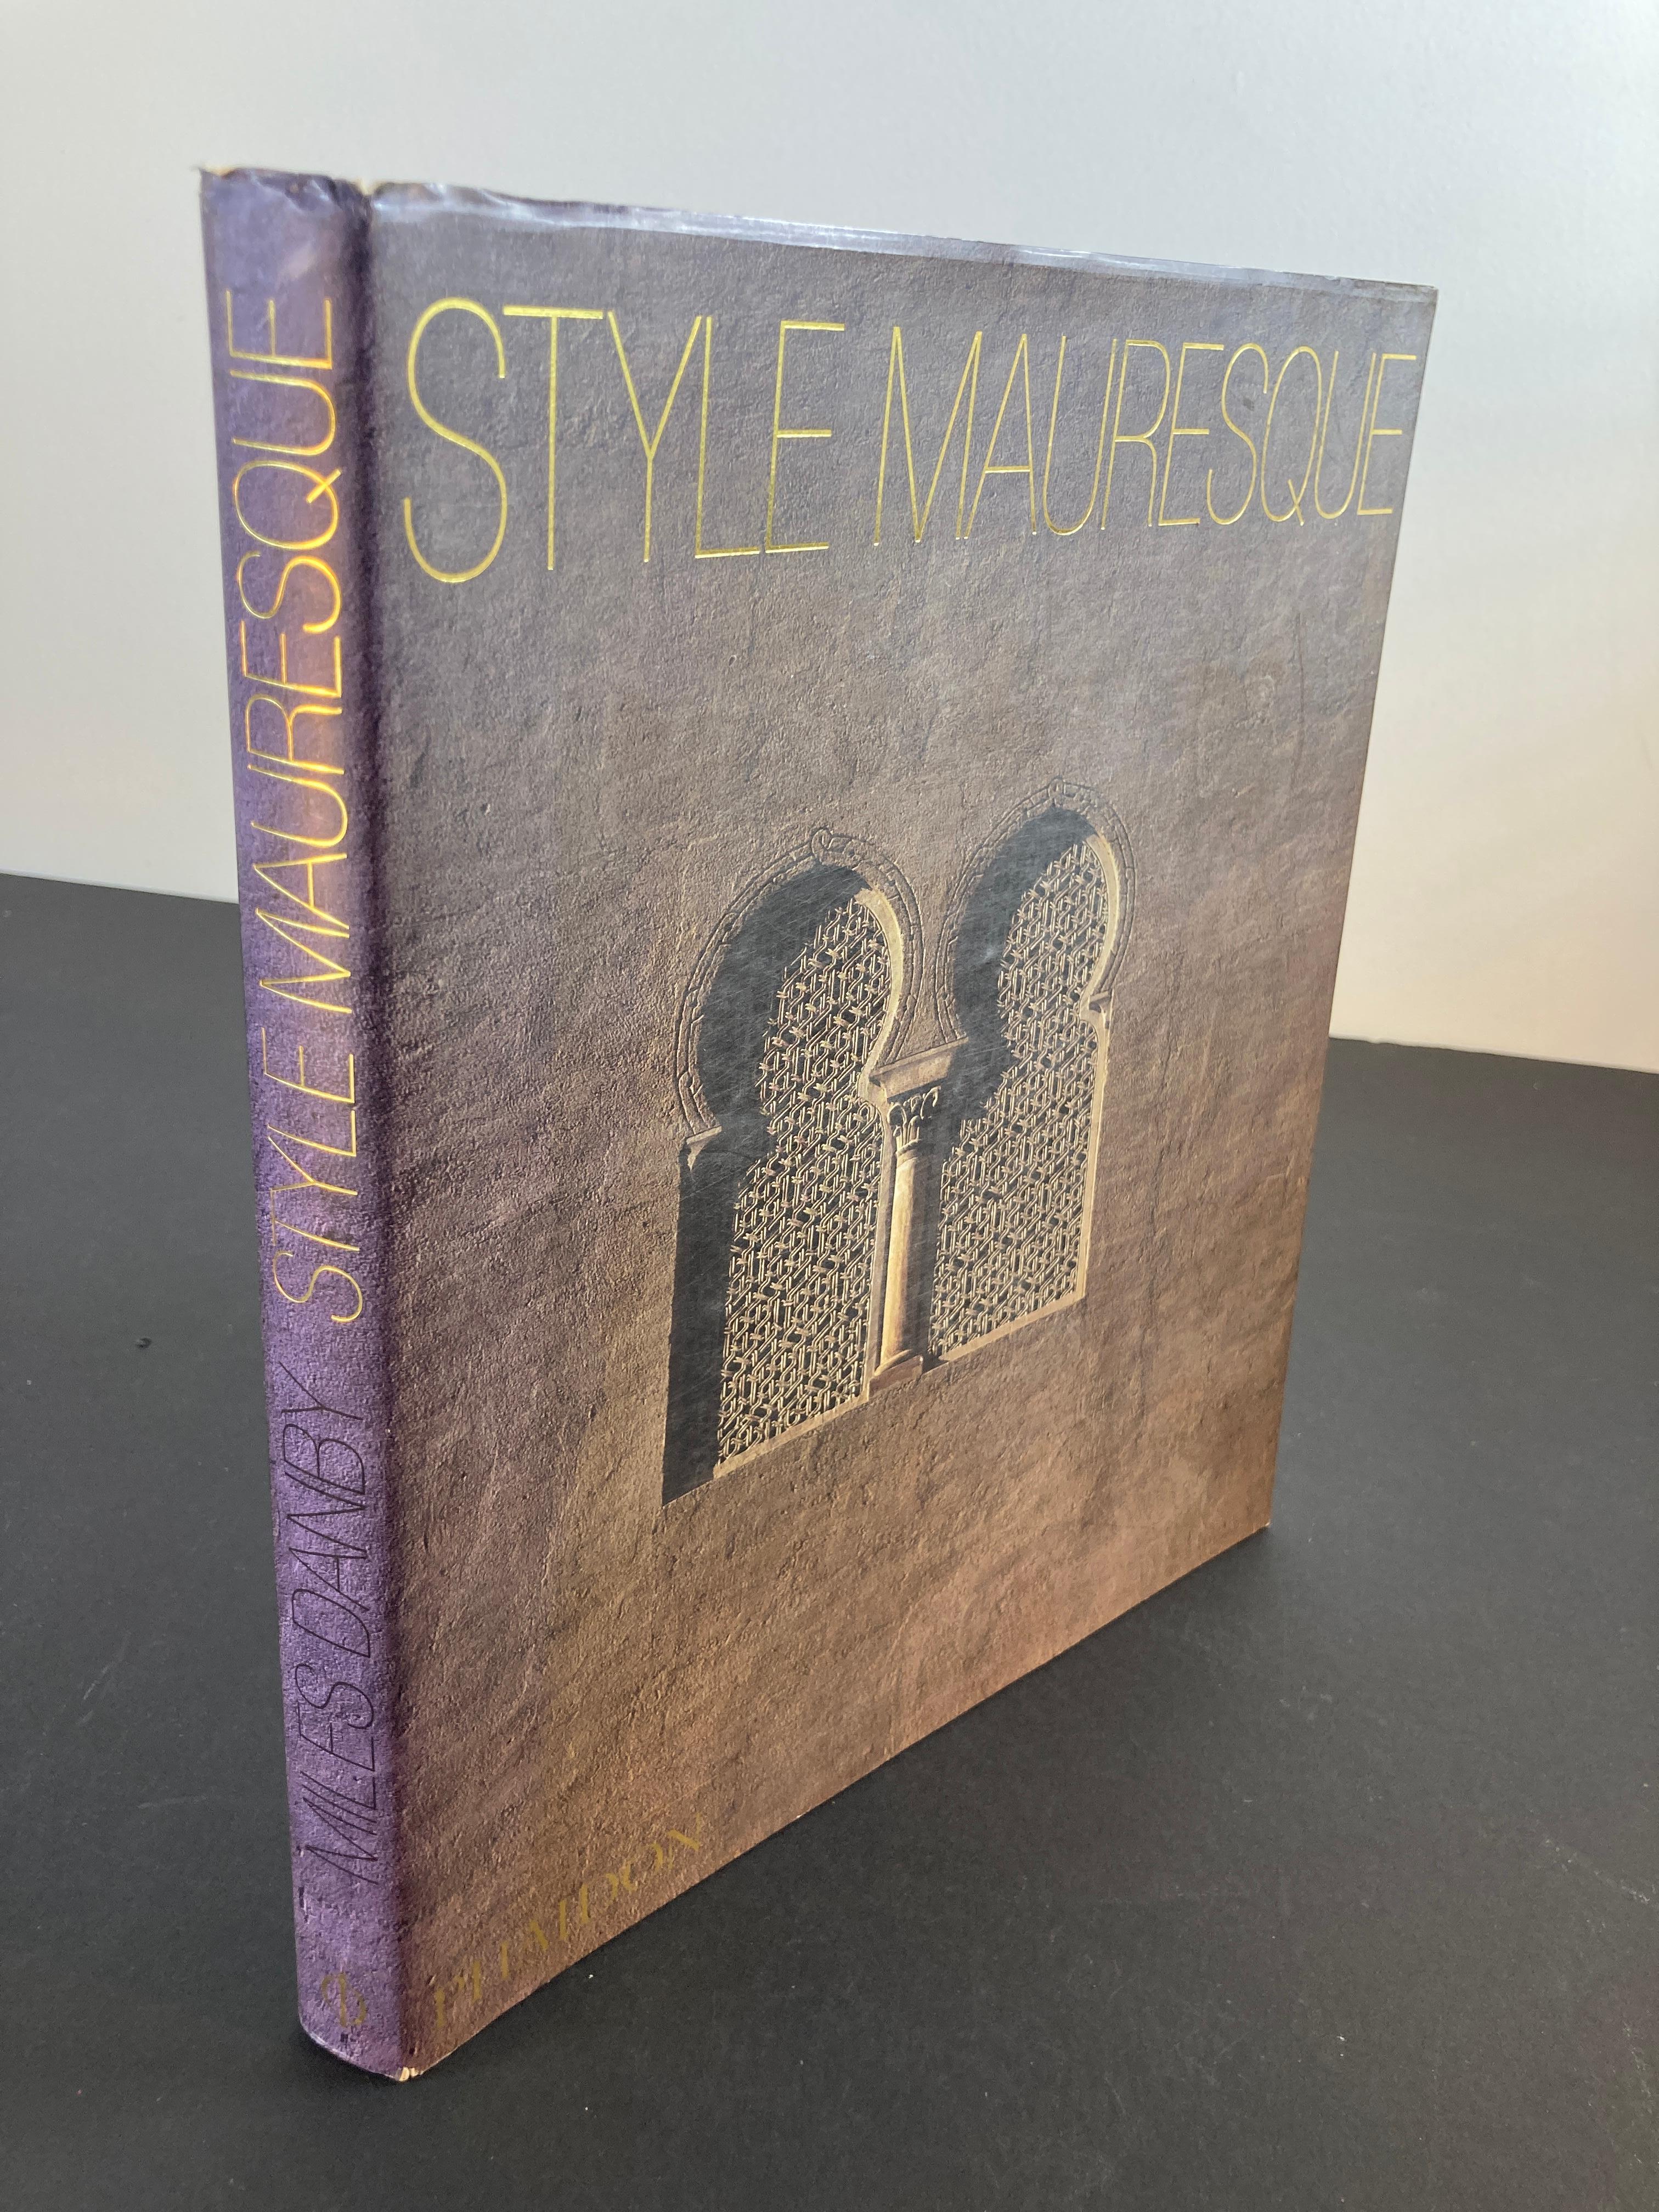 20th Century Moorish Style, Style Mauresque French Edition Hardcover Book For Sale